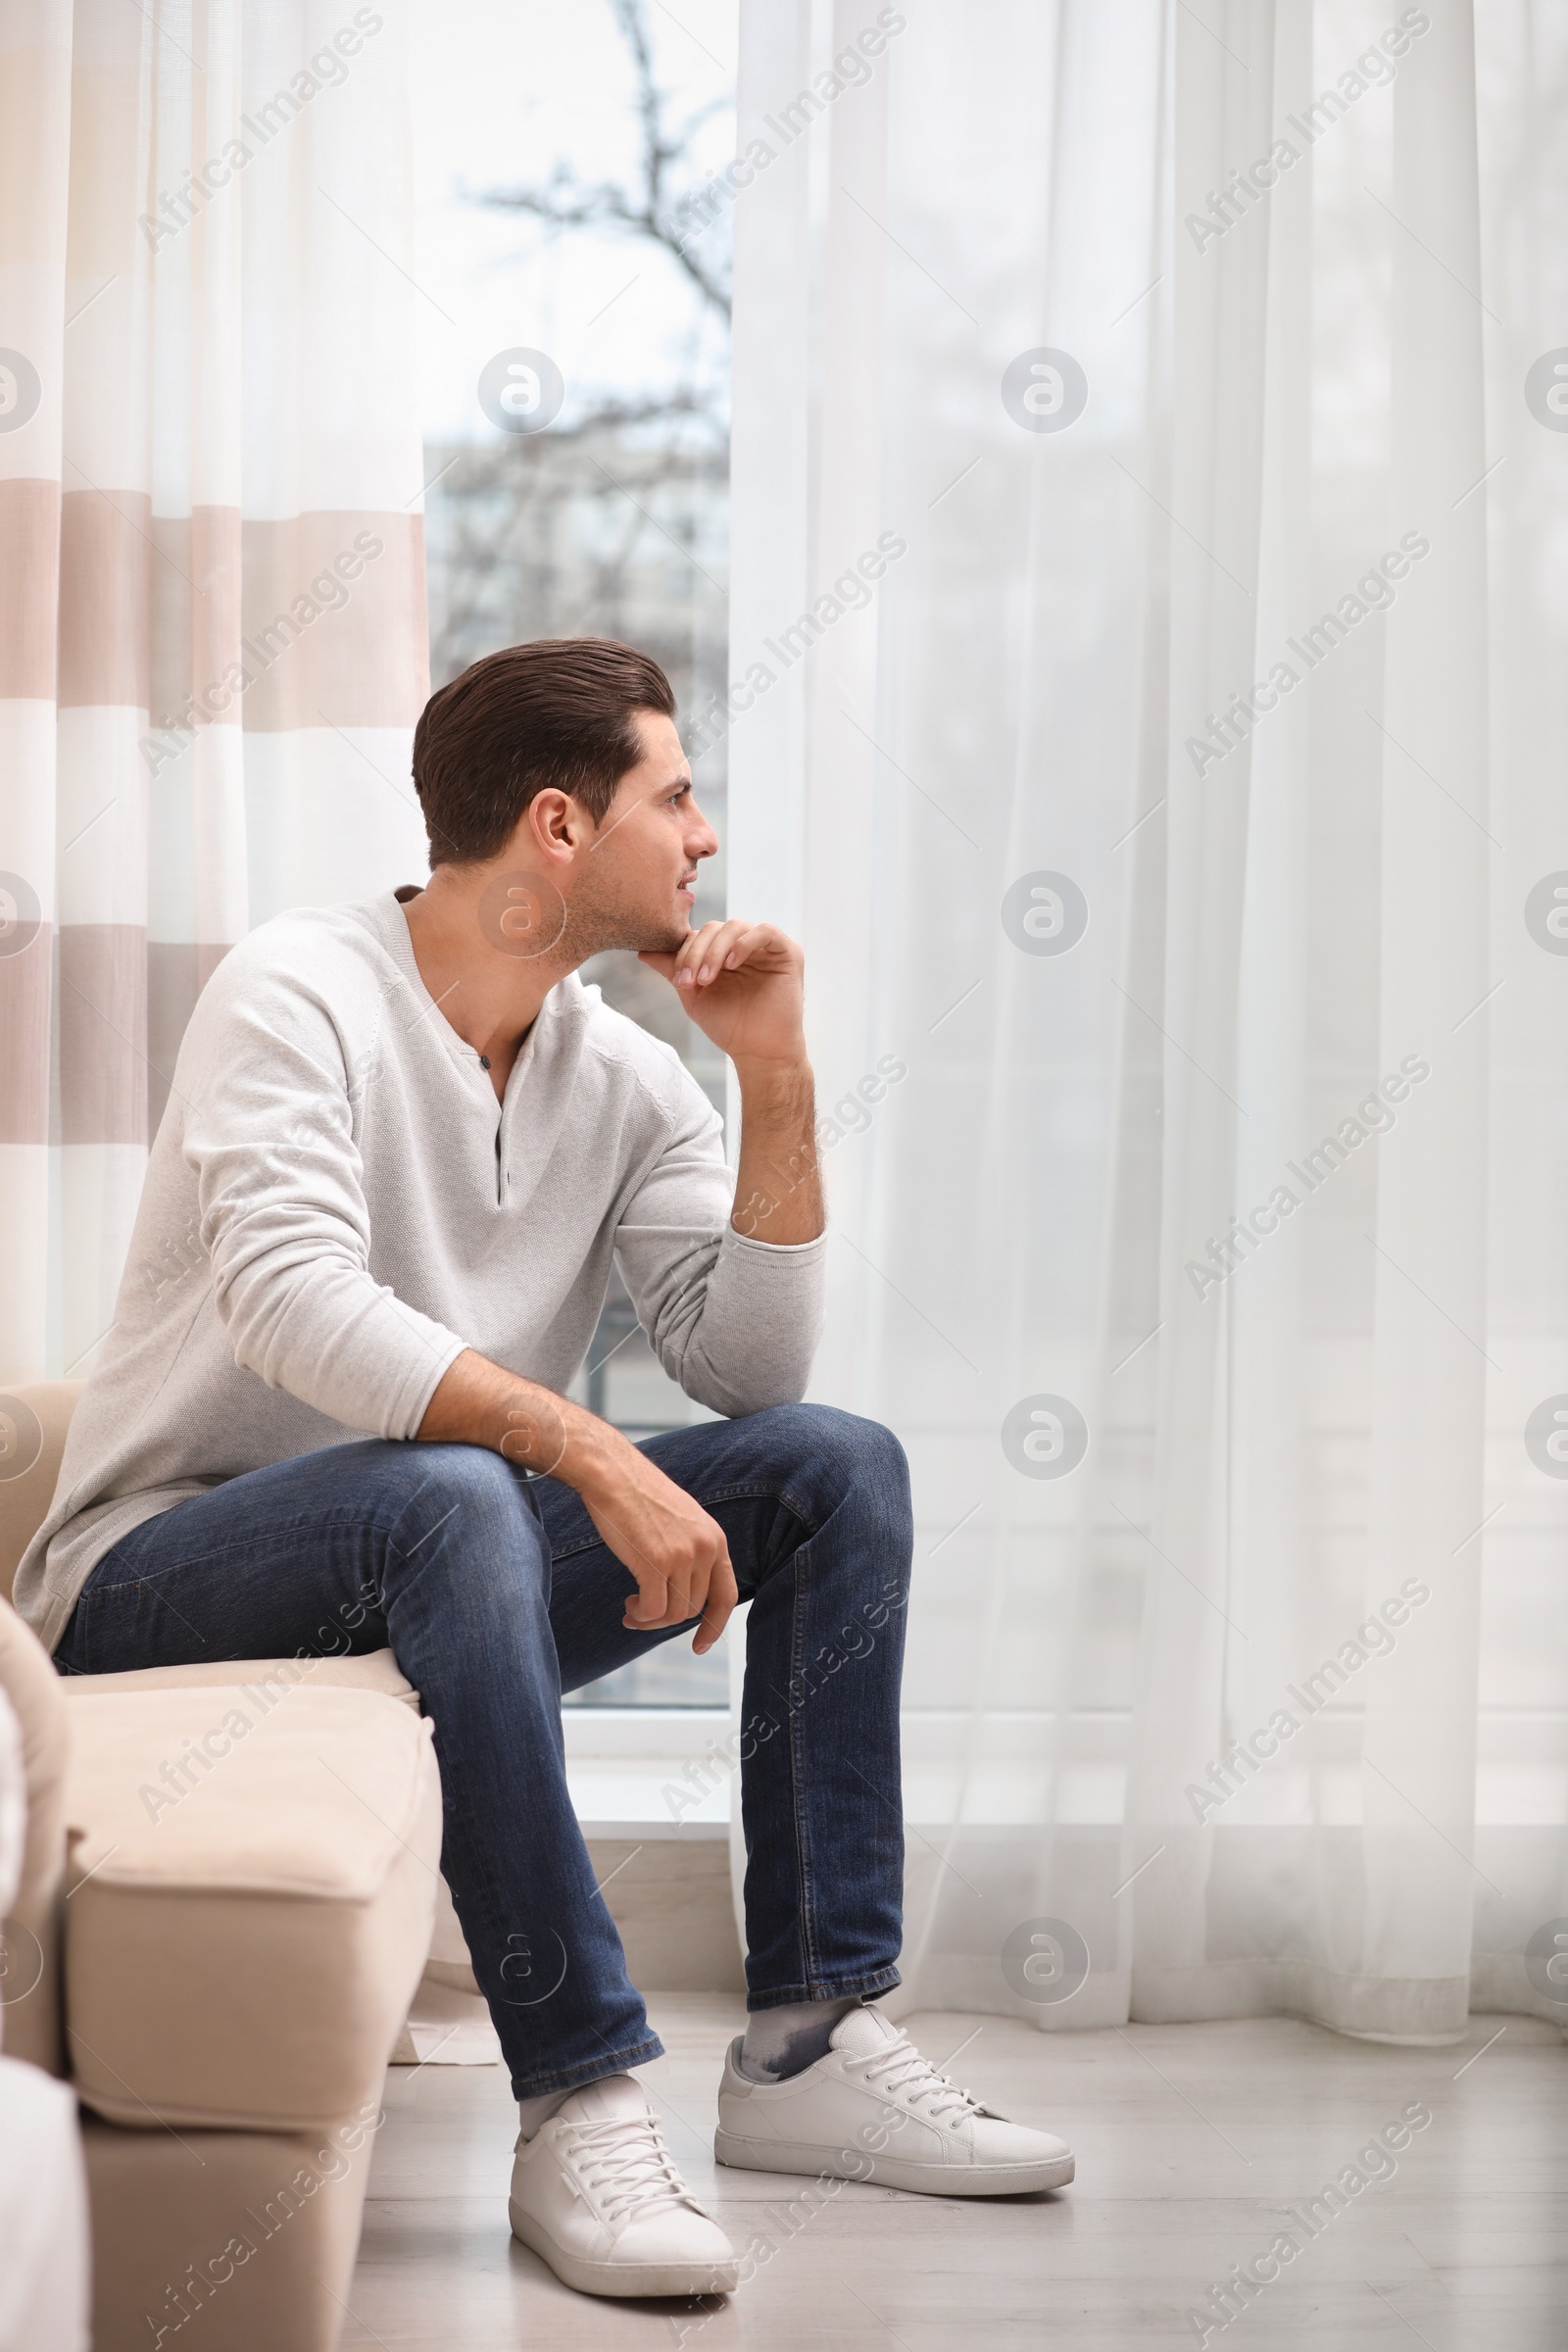 Photo of Handsome man resting on couch near window at home